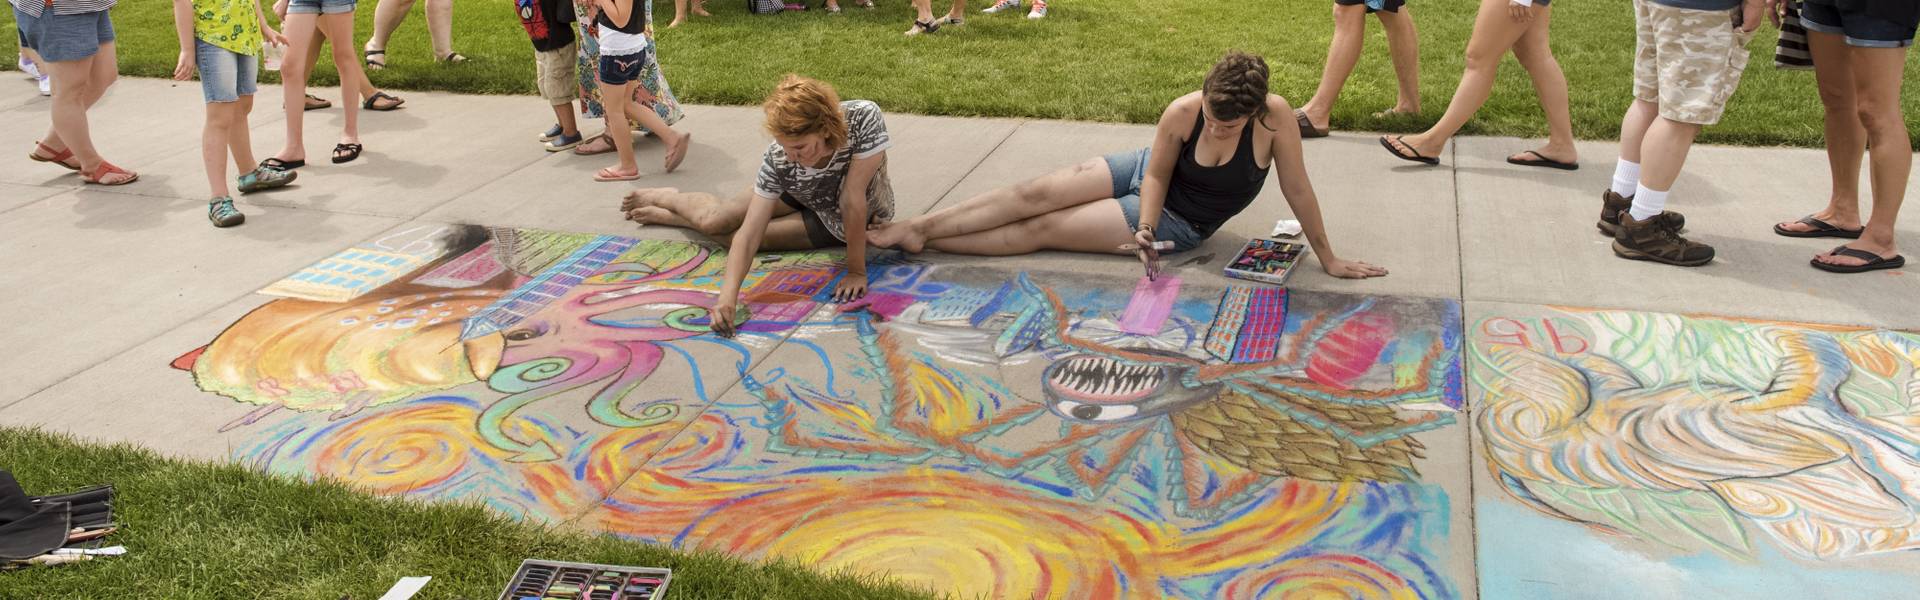 Families walk around the campus mall during Chalkfest.